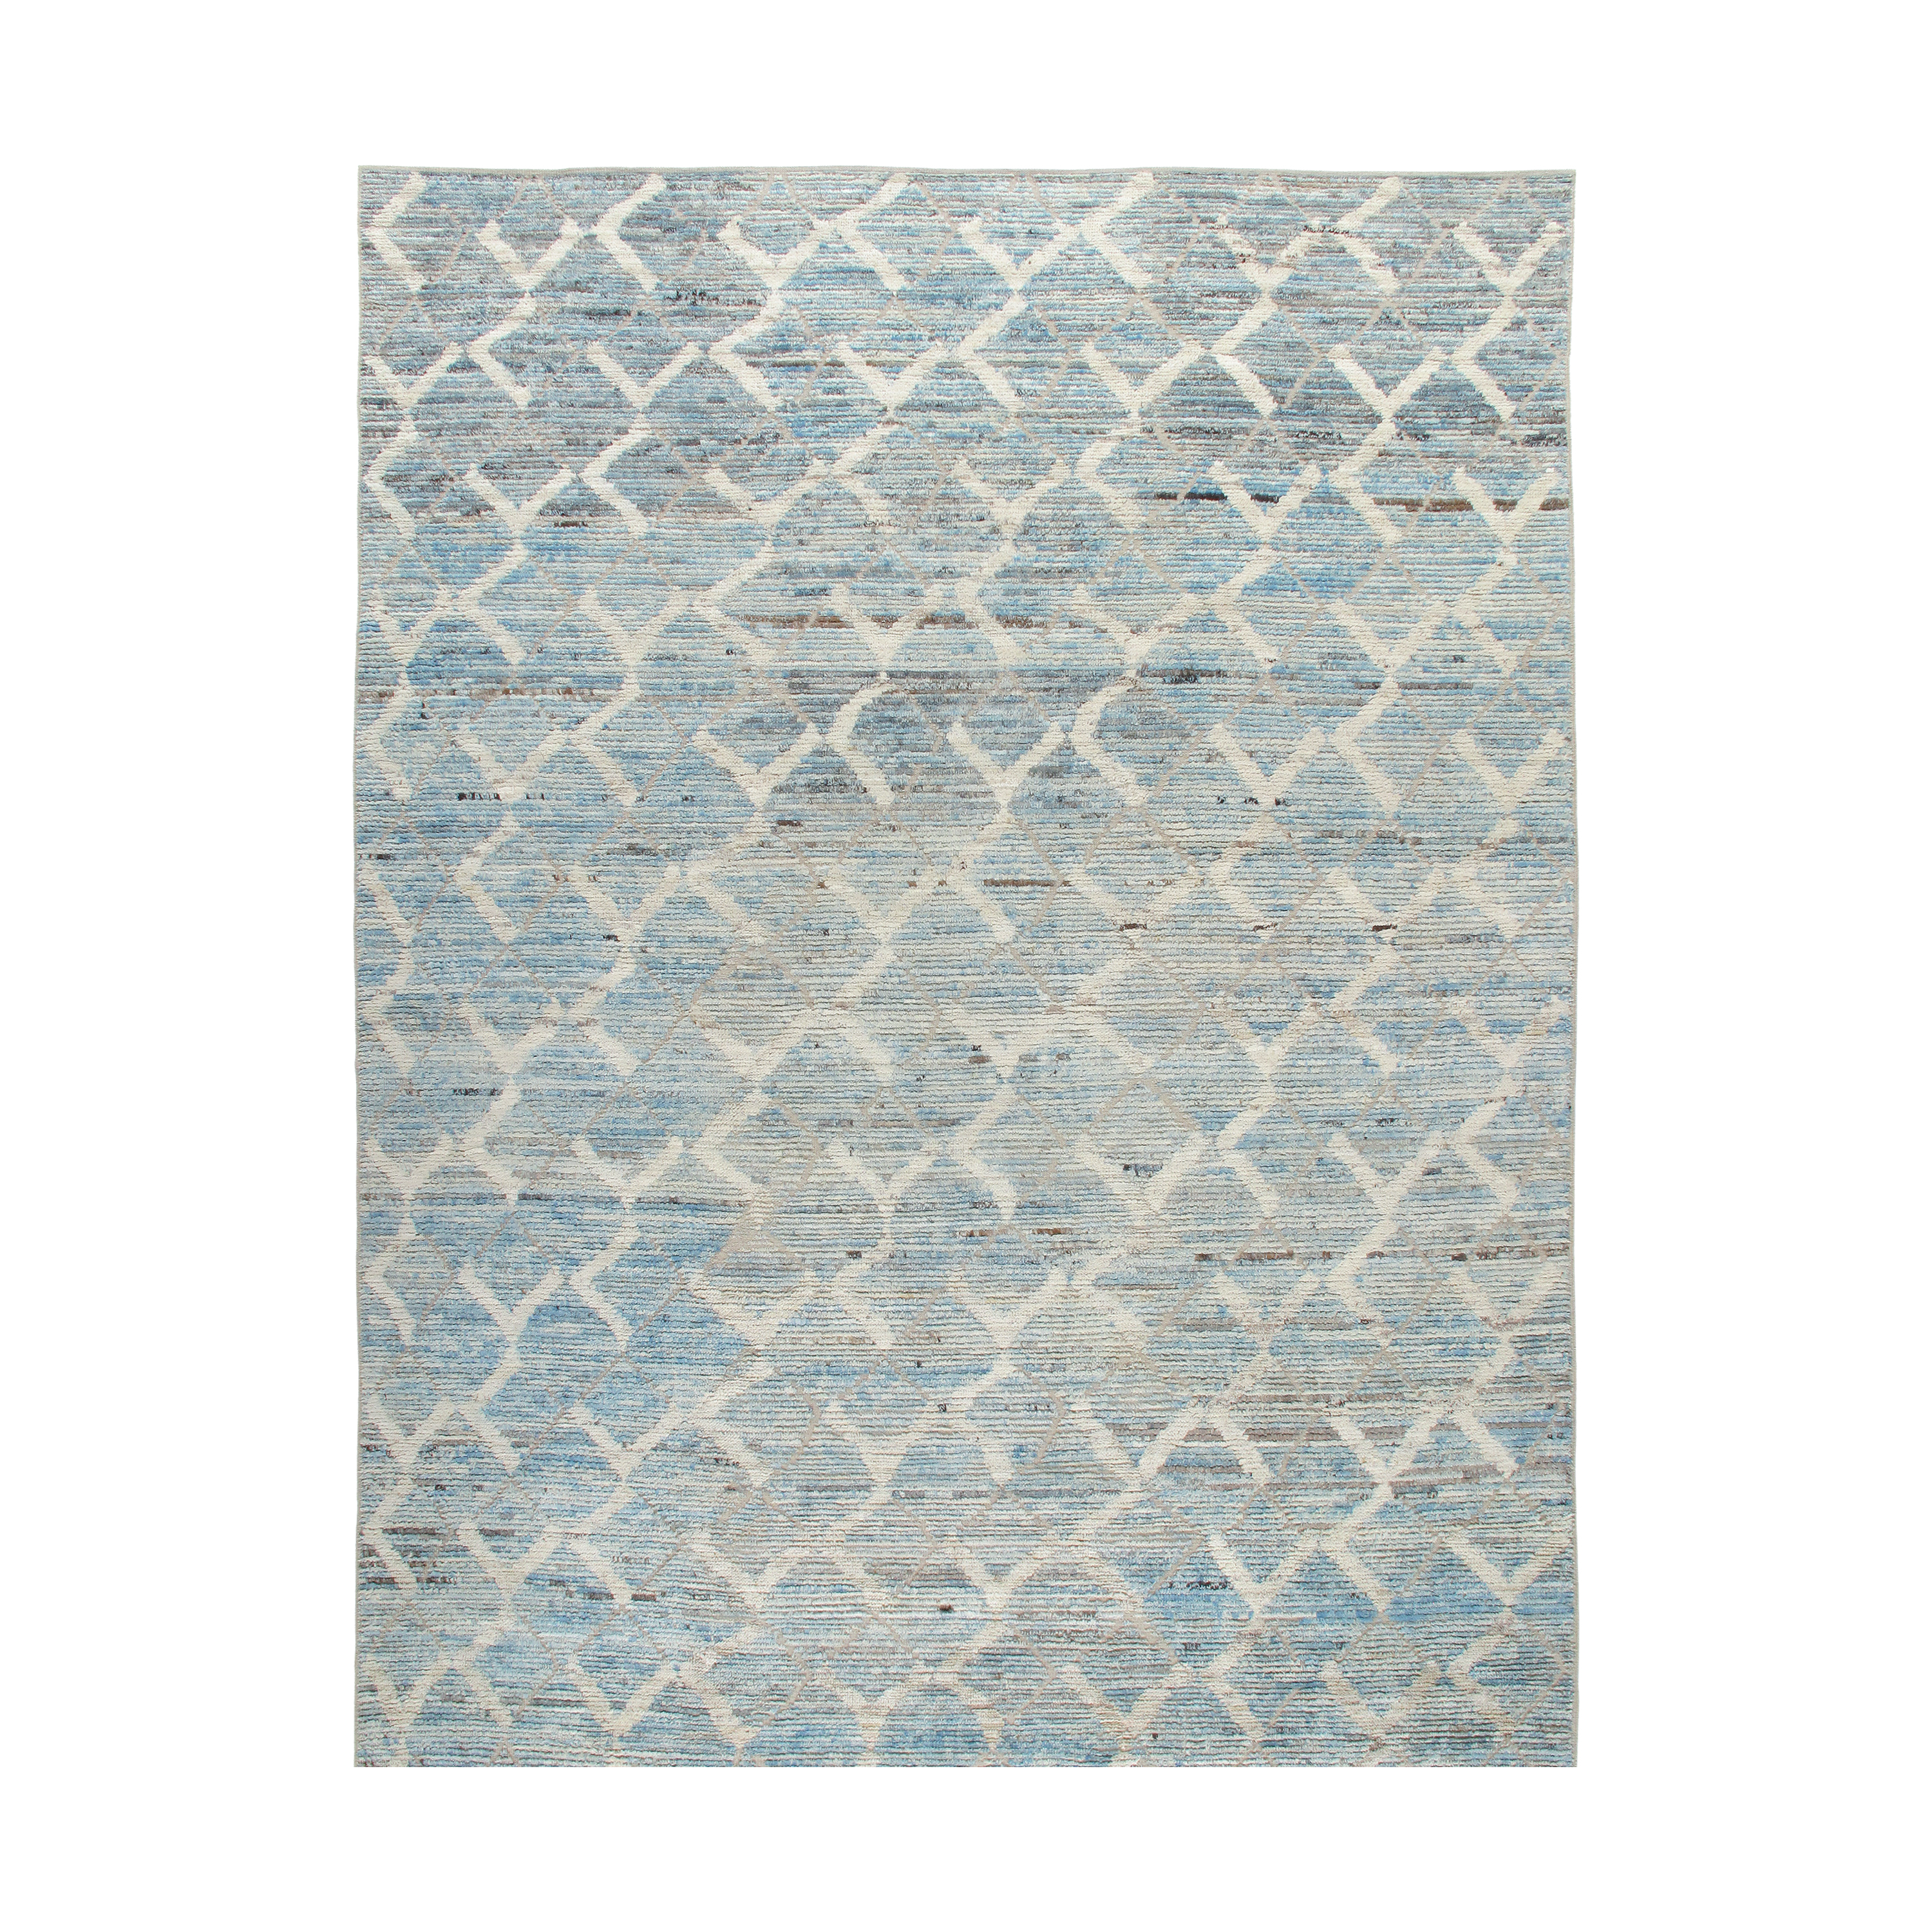 Trelis rug is hand-knotted from the finest, handspun, naturally dyed wool. 